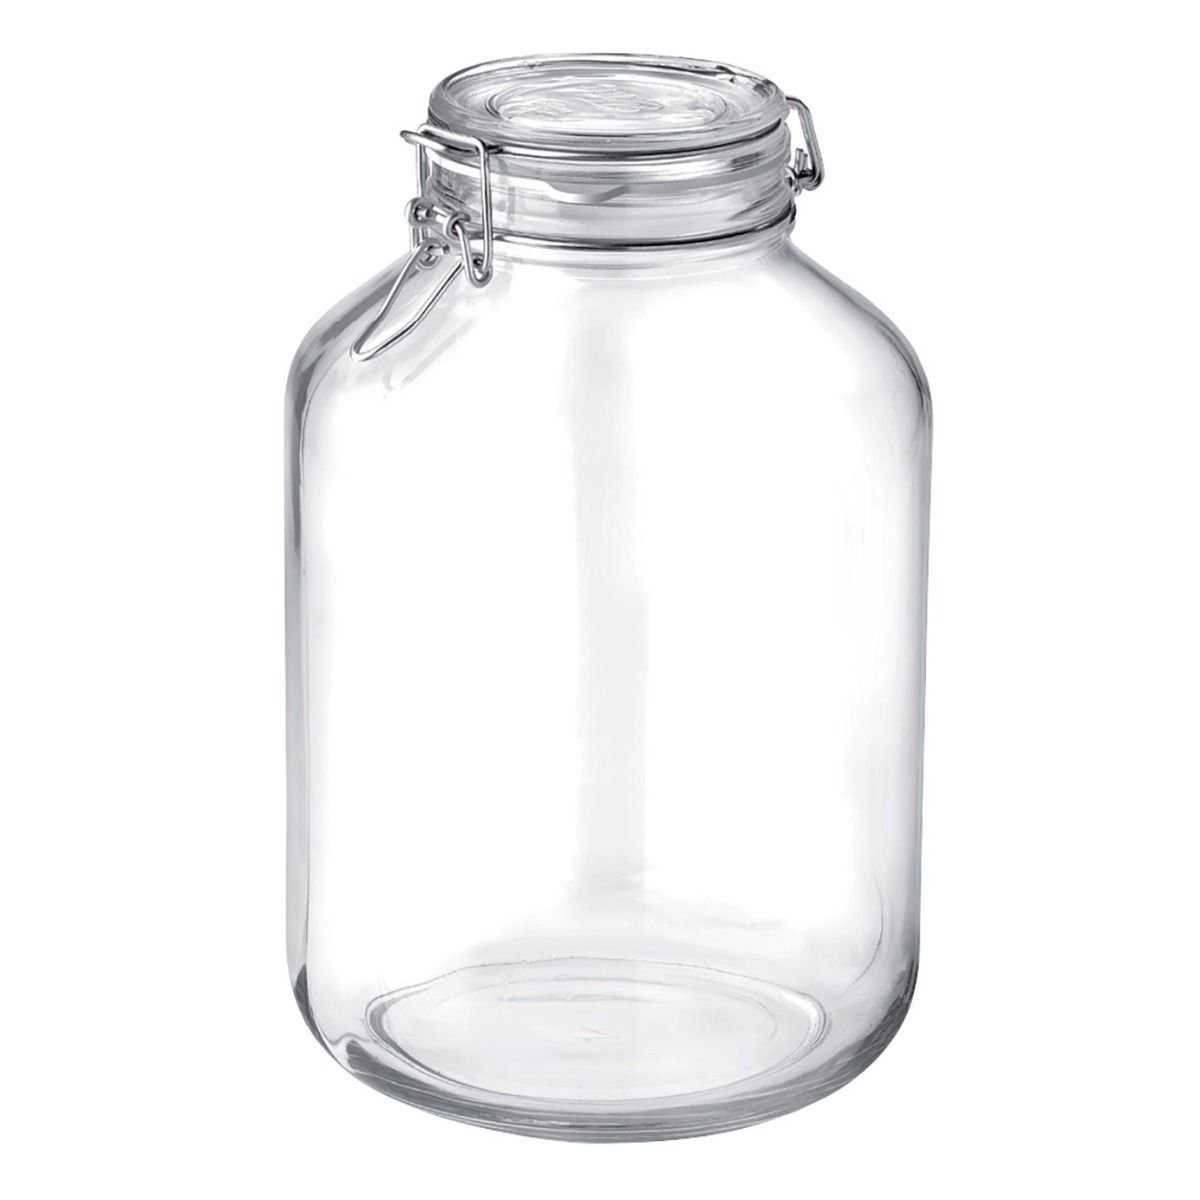 Country Mason Jar Wine Glasses Set of 2 (Factory Made) 